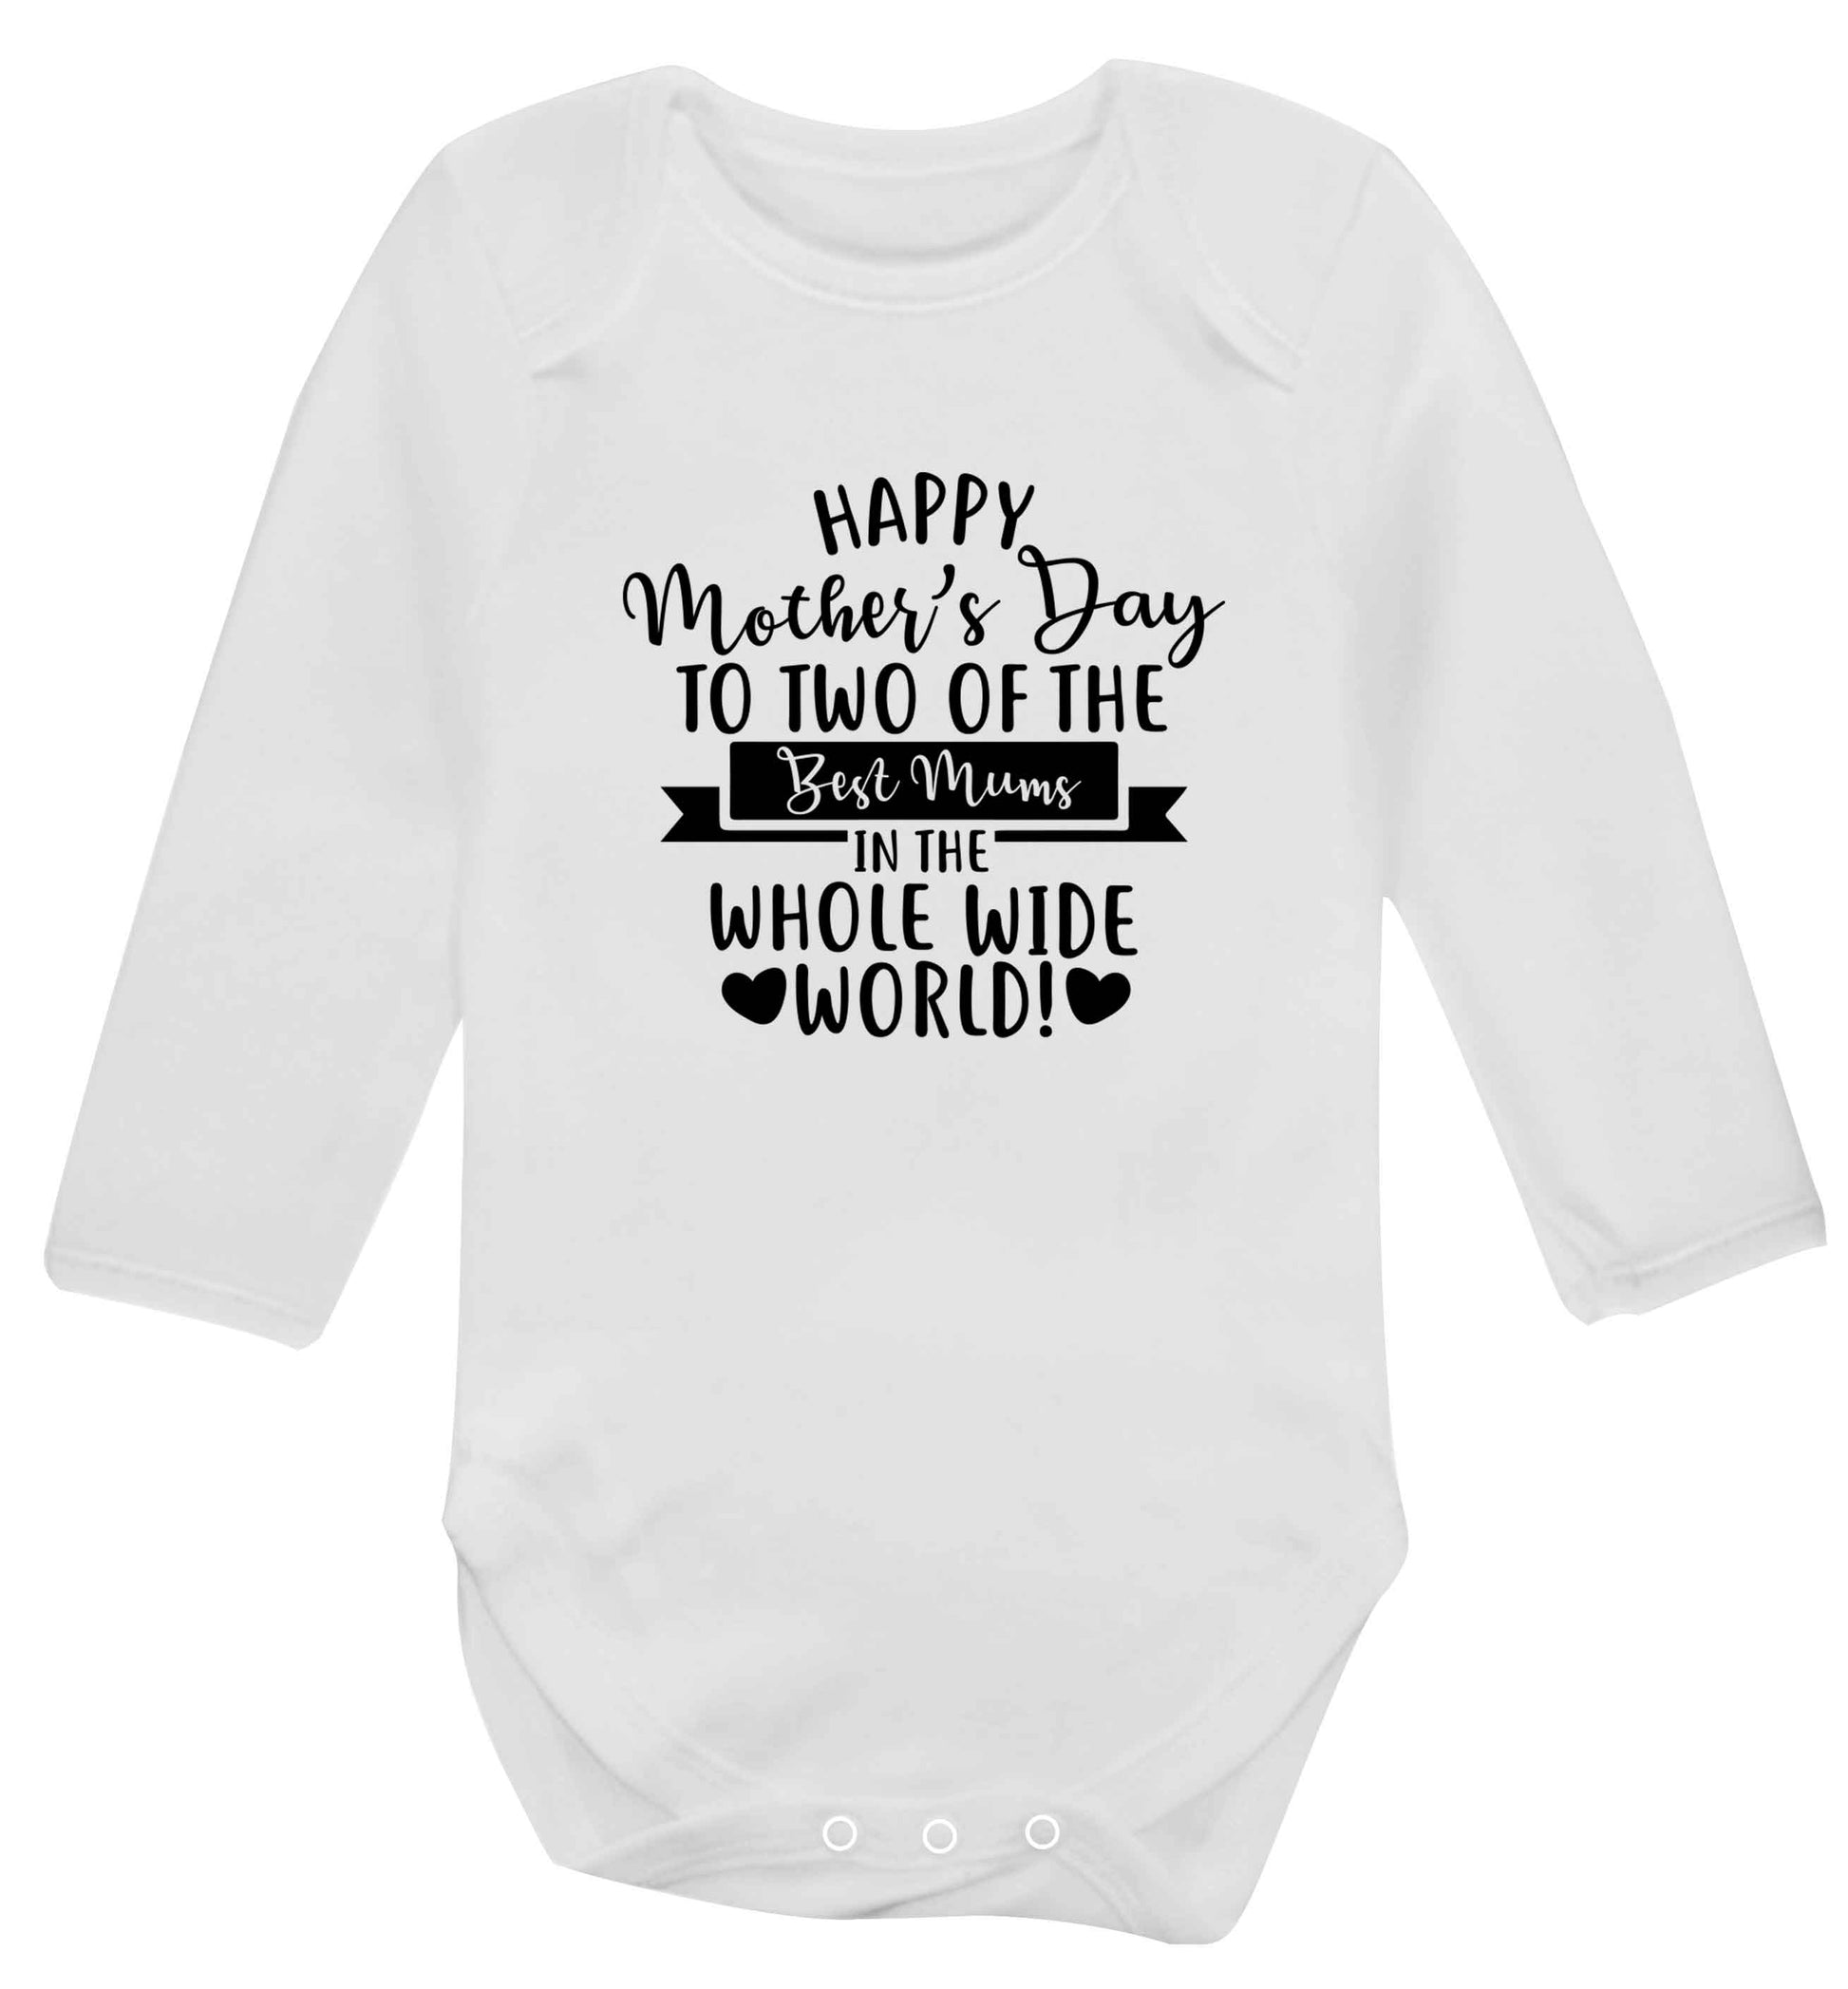 Happy mother's day to two of the best mums in the whole wide world baby vest long sleeved white 6-12 months